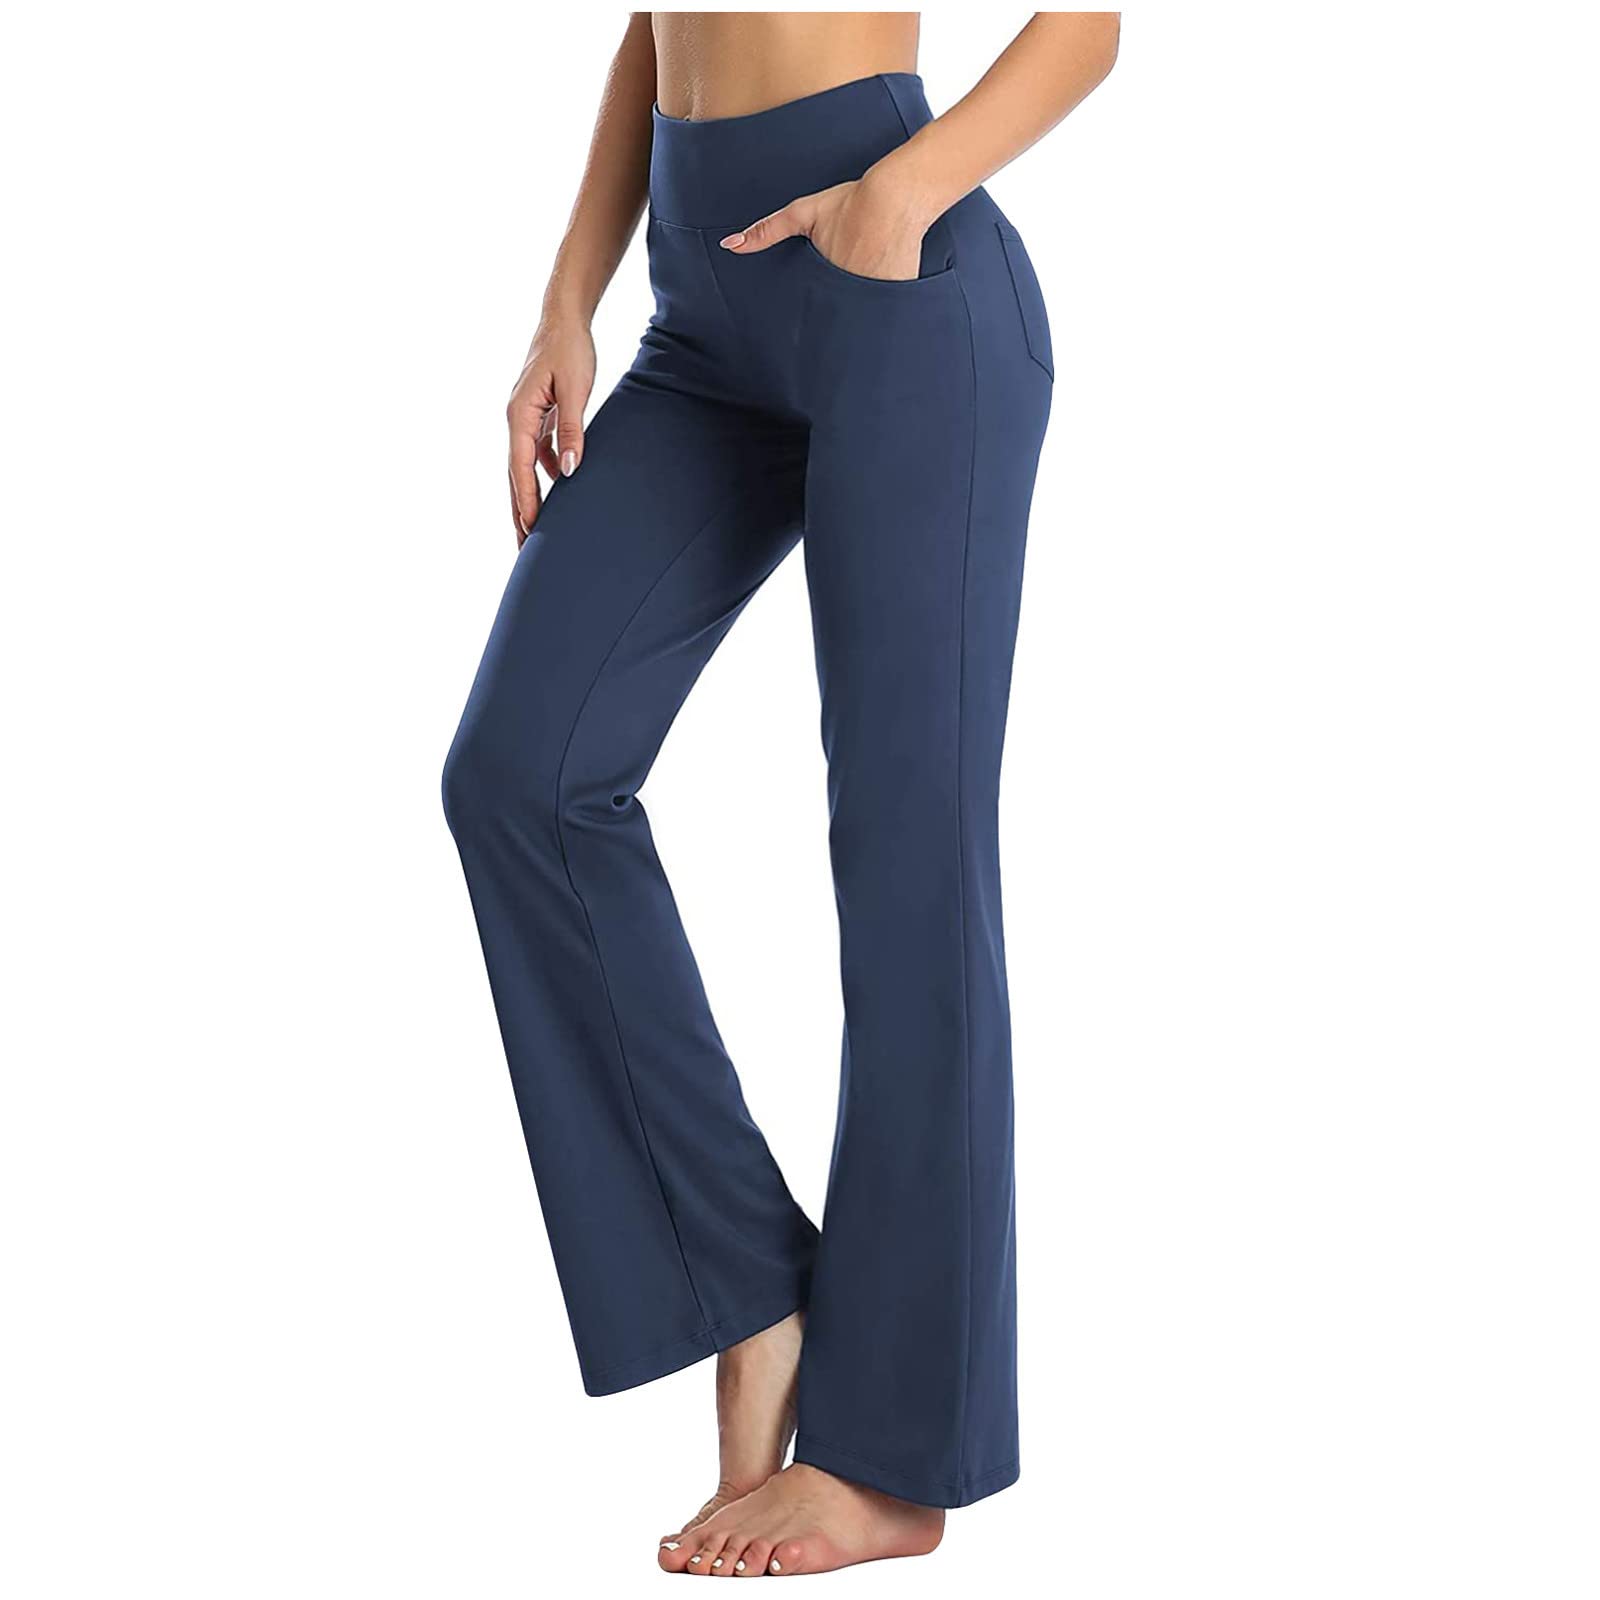 COJCOIHN Buttery Soft Women's Bootcut Yoga Pants with 4 Pockets